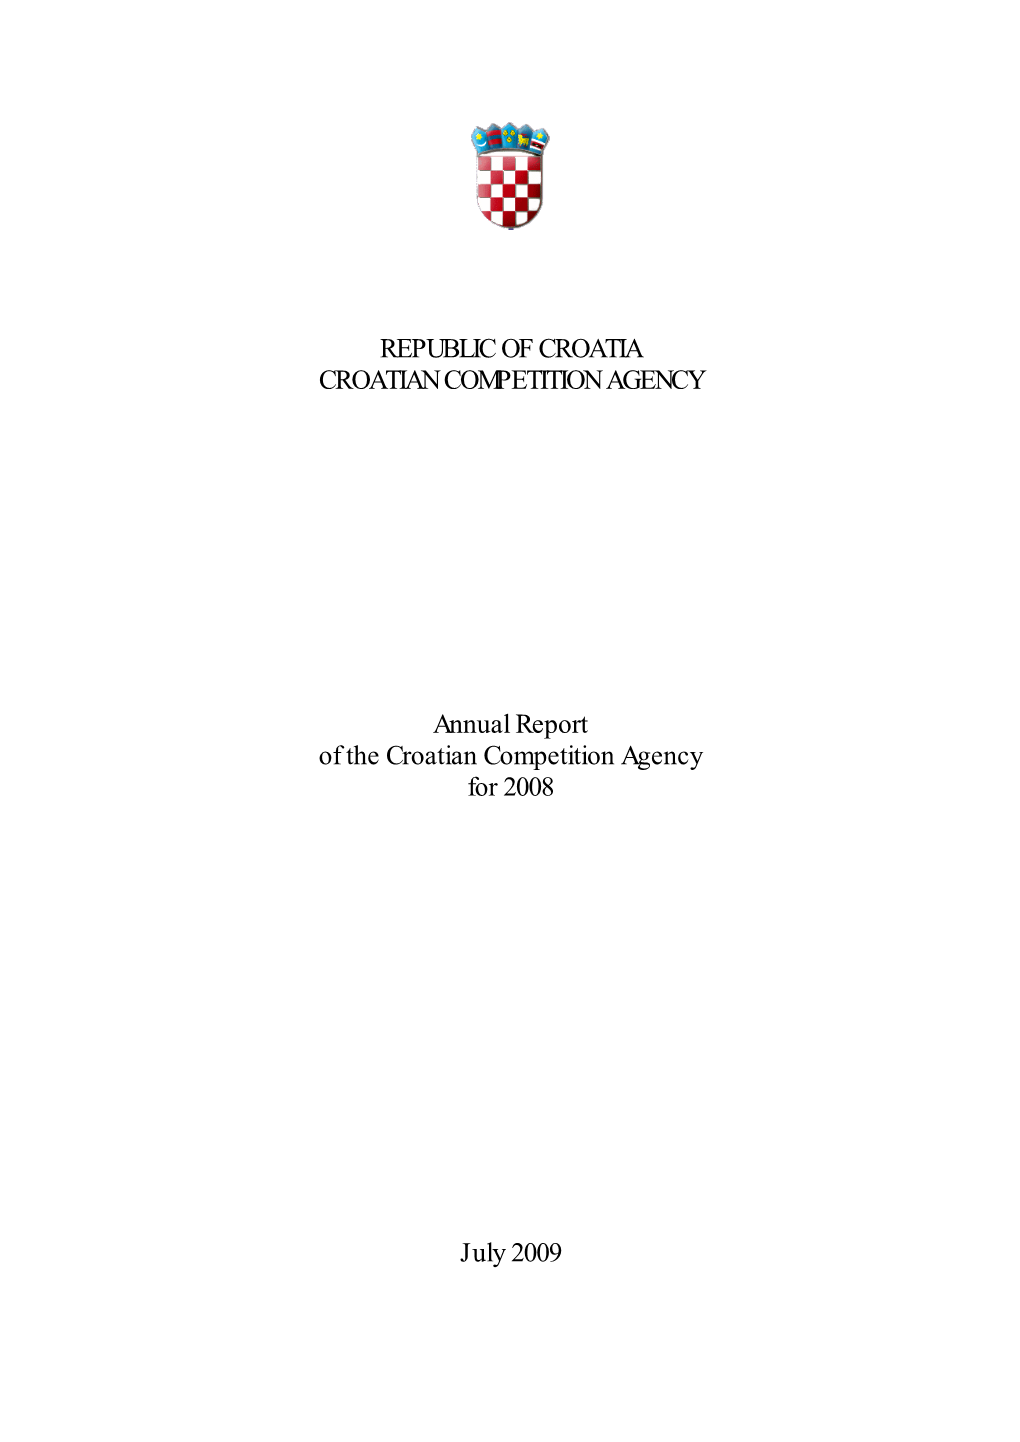 2. Activities of the Croatian Competition Agency in 2008